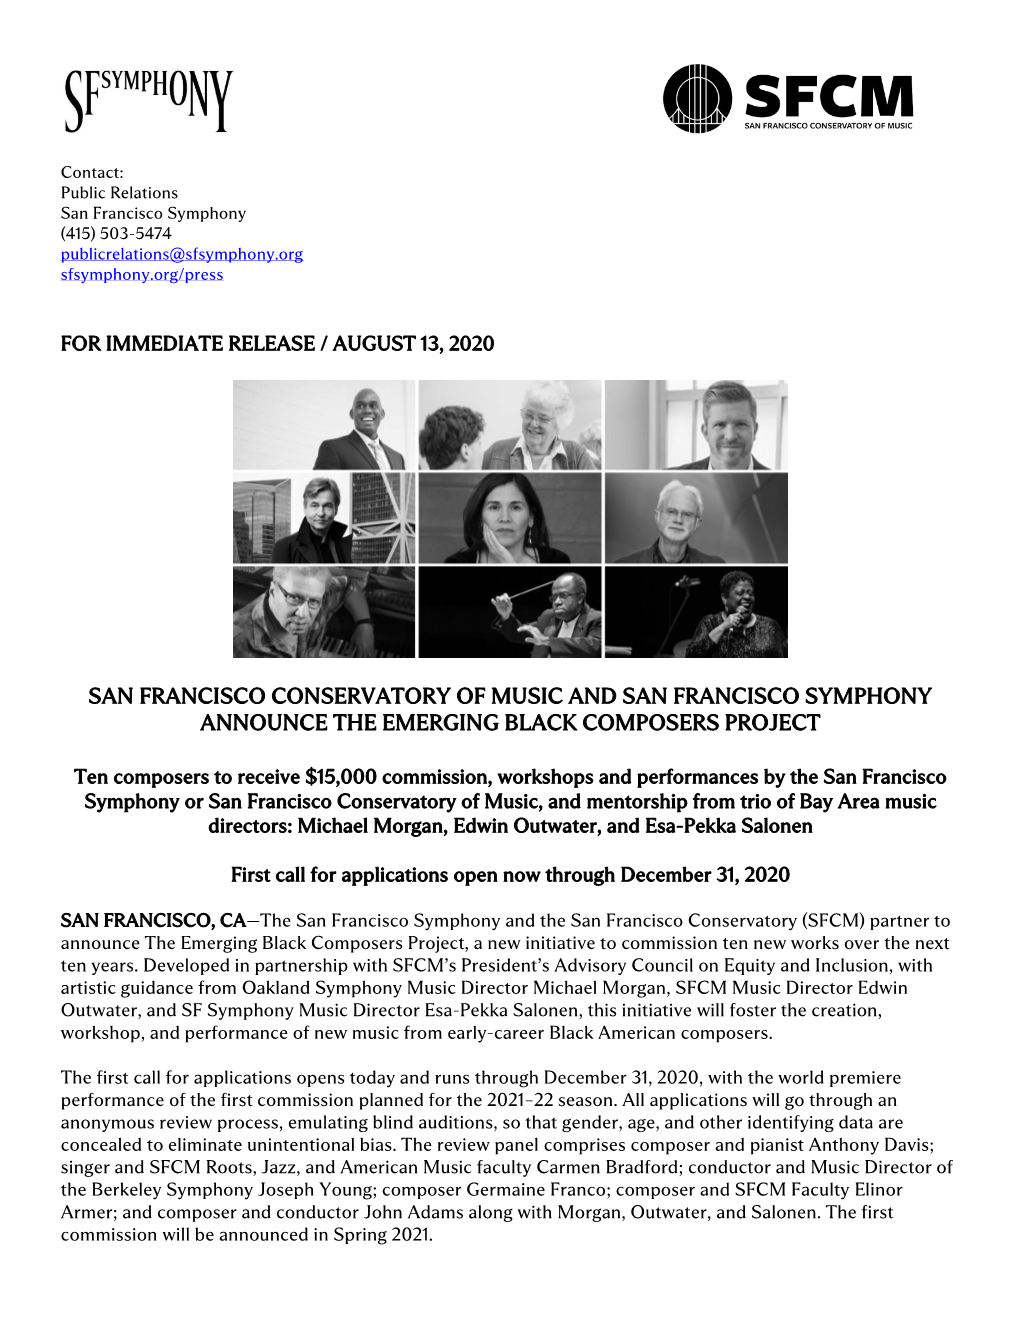 San Francisco Conservatory of Music and San Francisco Symphony Announce the Emerging Black Composers Project